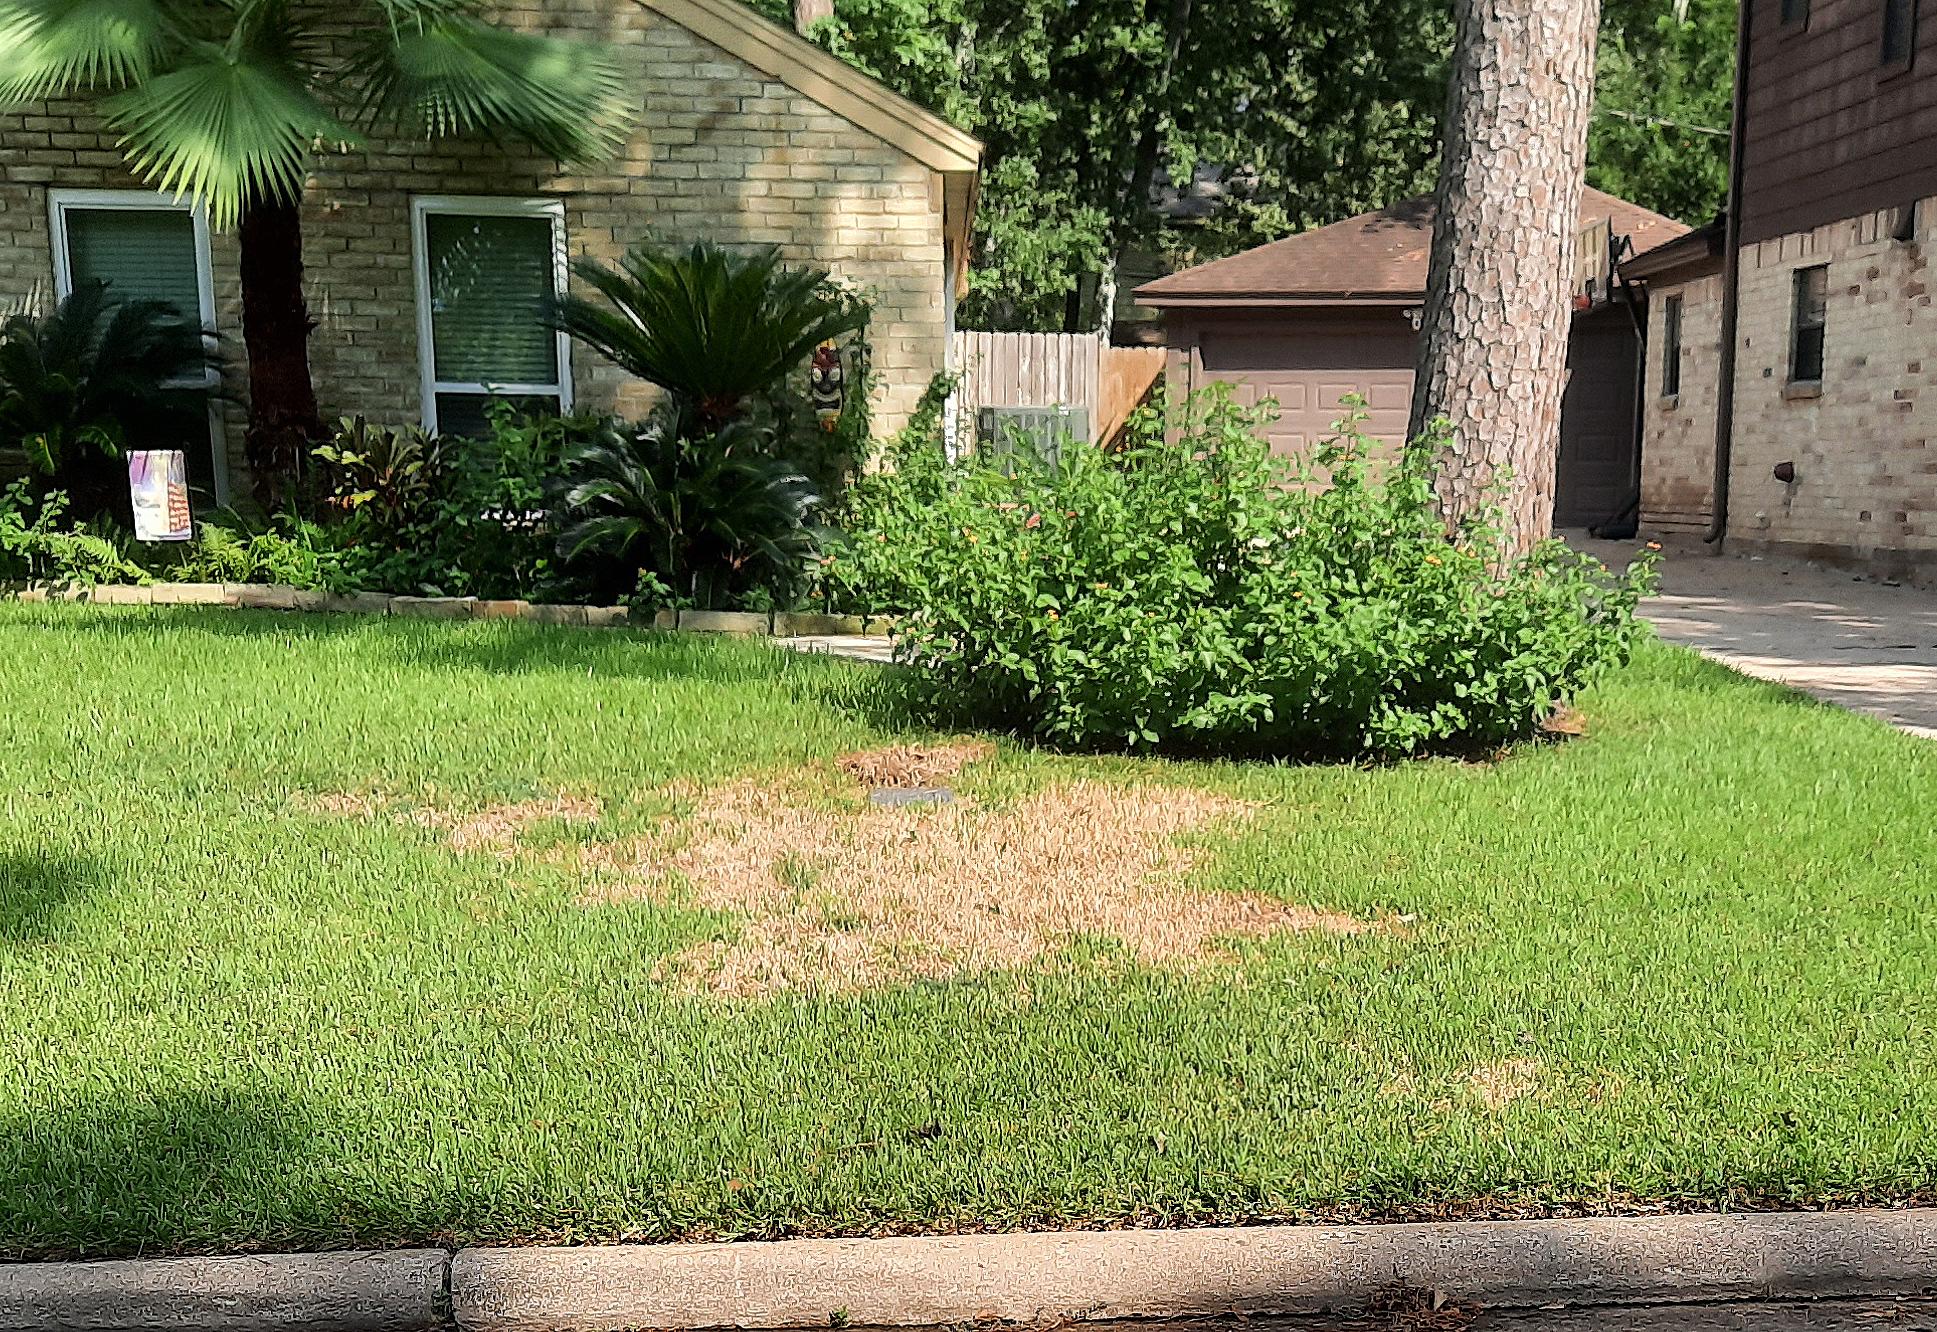 Northwest Houston Area Residents Dealing With Pesky Sod Webworms Again